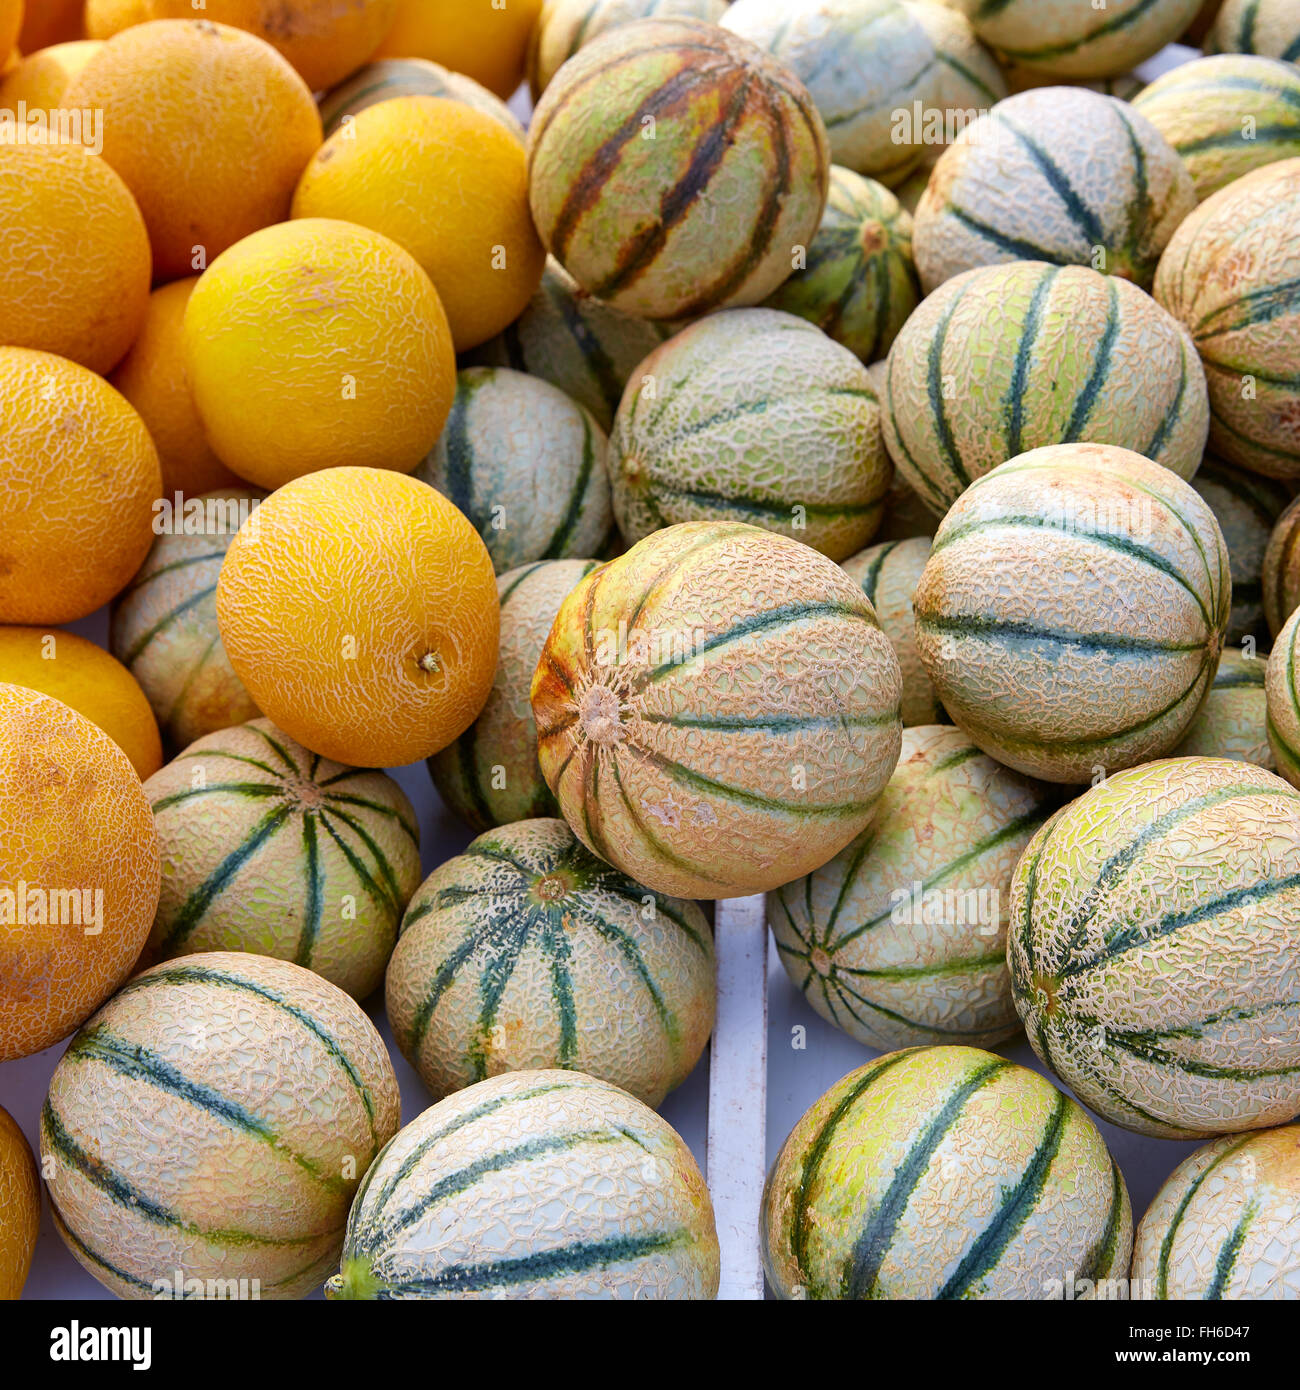 Cantaloupe and yellow melons at the marketplace stacked Stock Photo